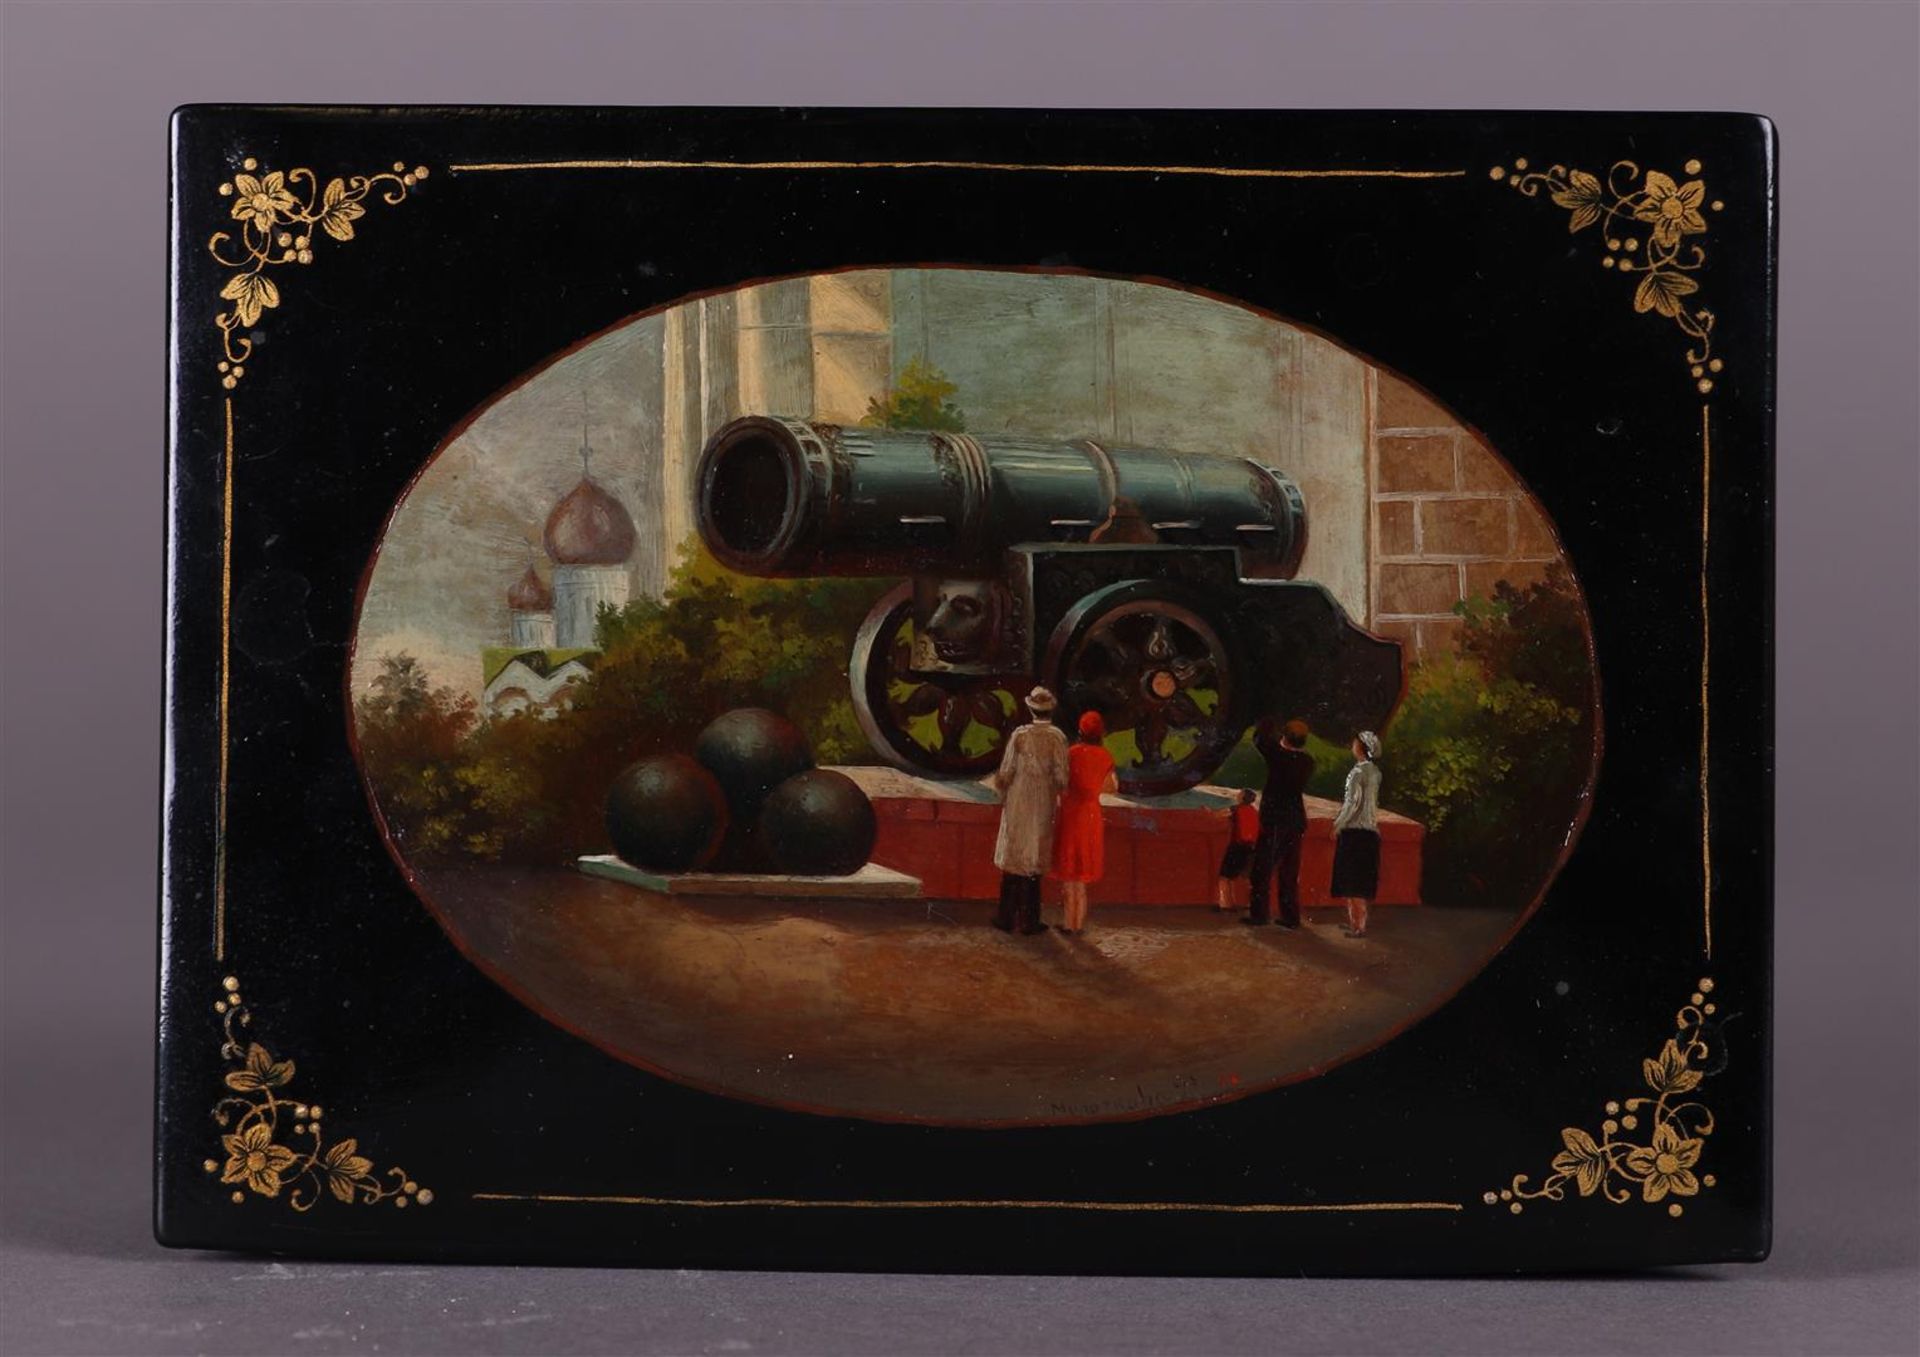 Russian Lacquer Box Depicting a Chinese Cannon (Circa 1930)